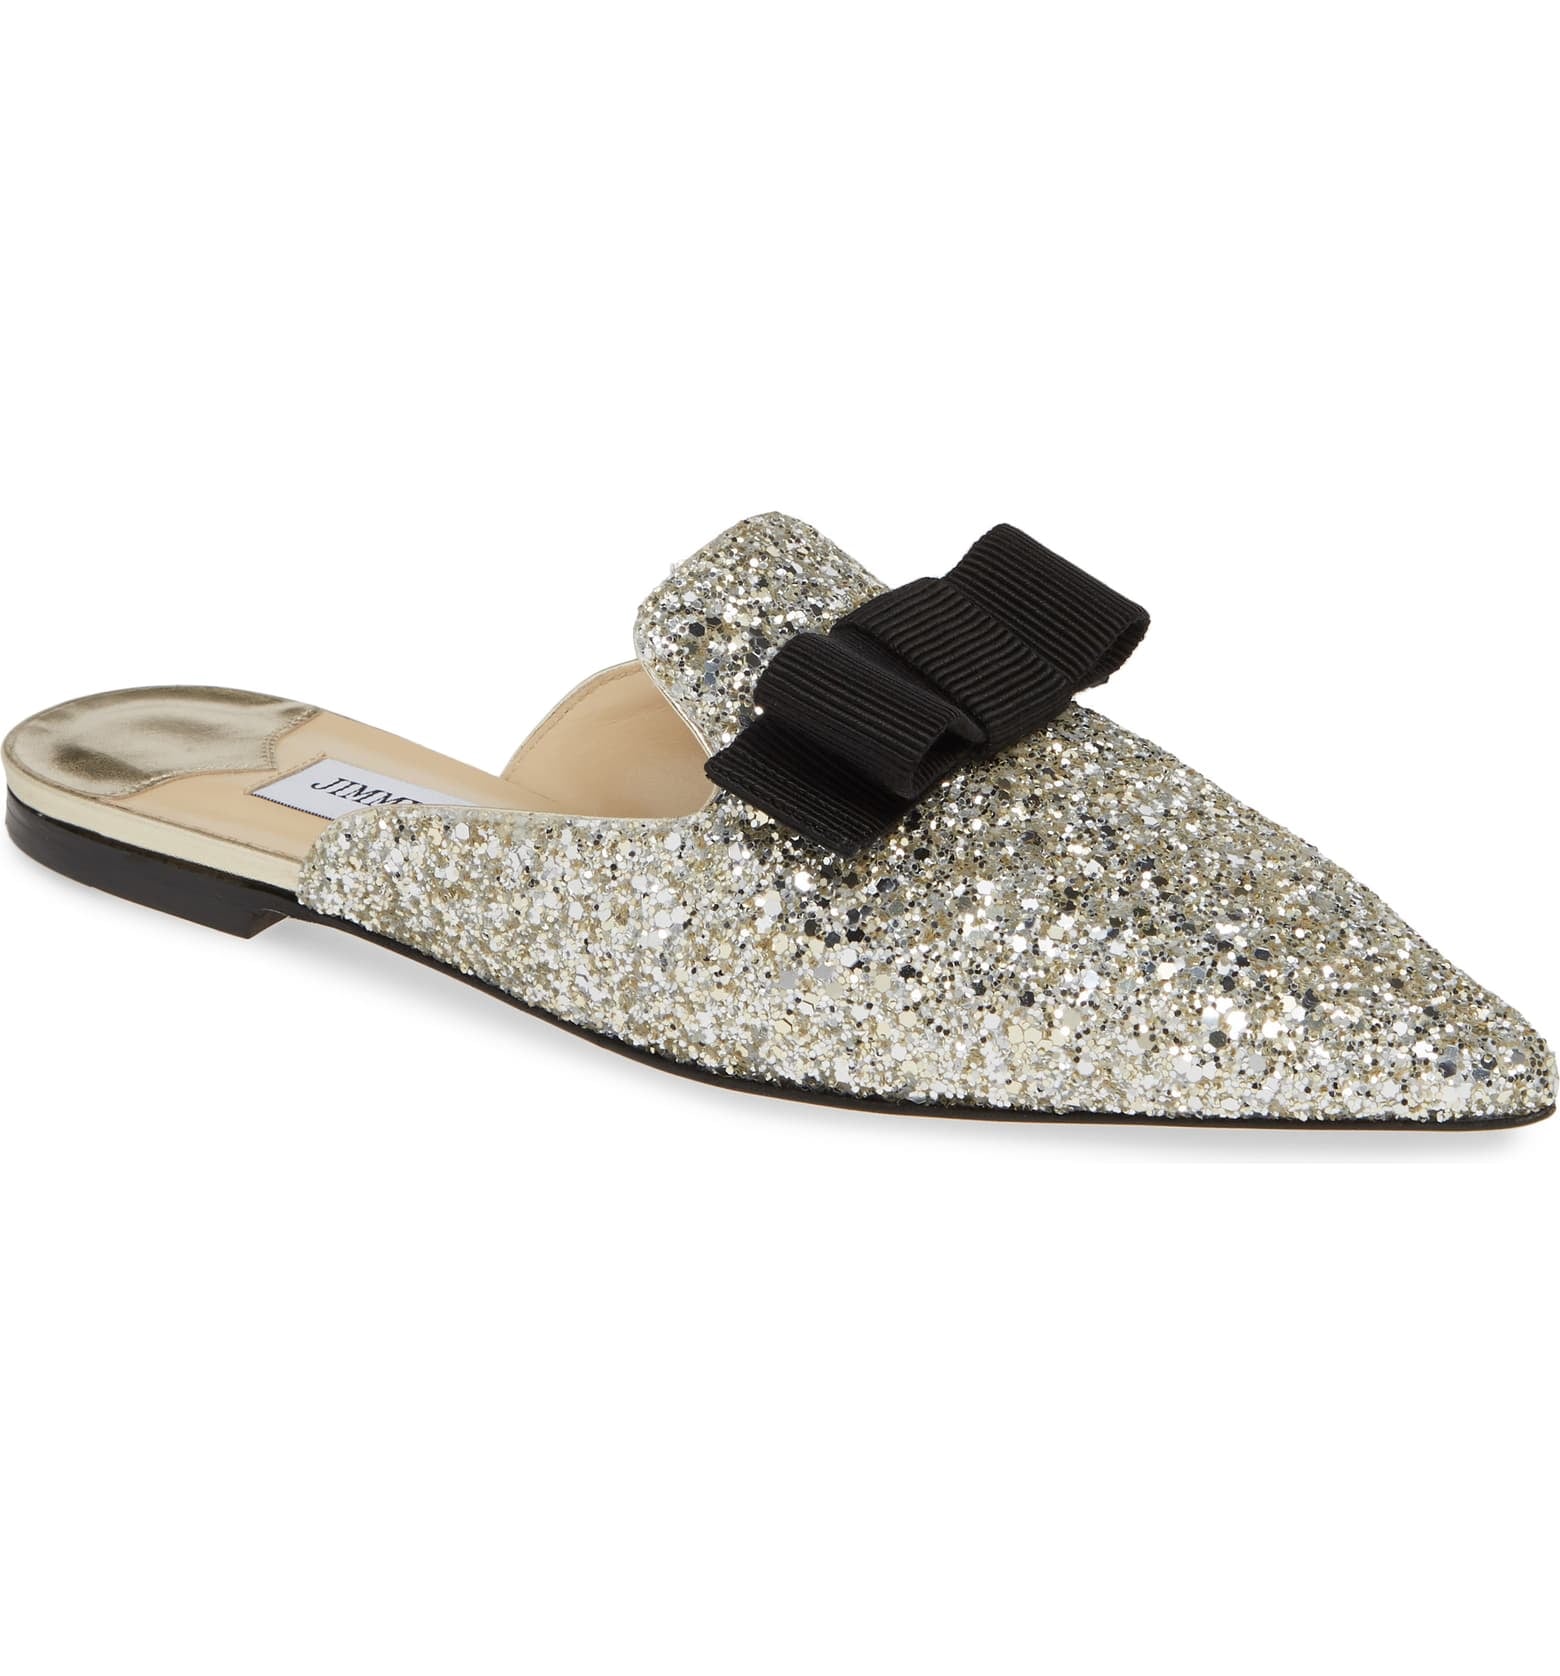 The Best Glitter Flats to Buy For Your Holiday Parties | POPSUGAR Fashion